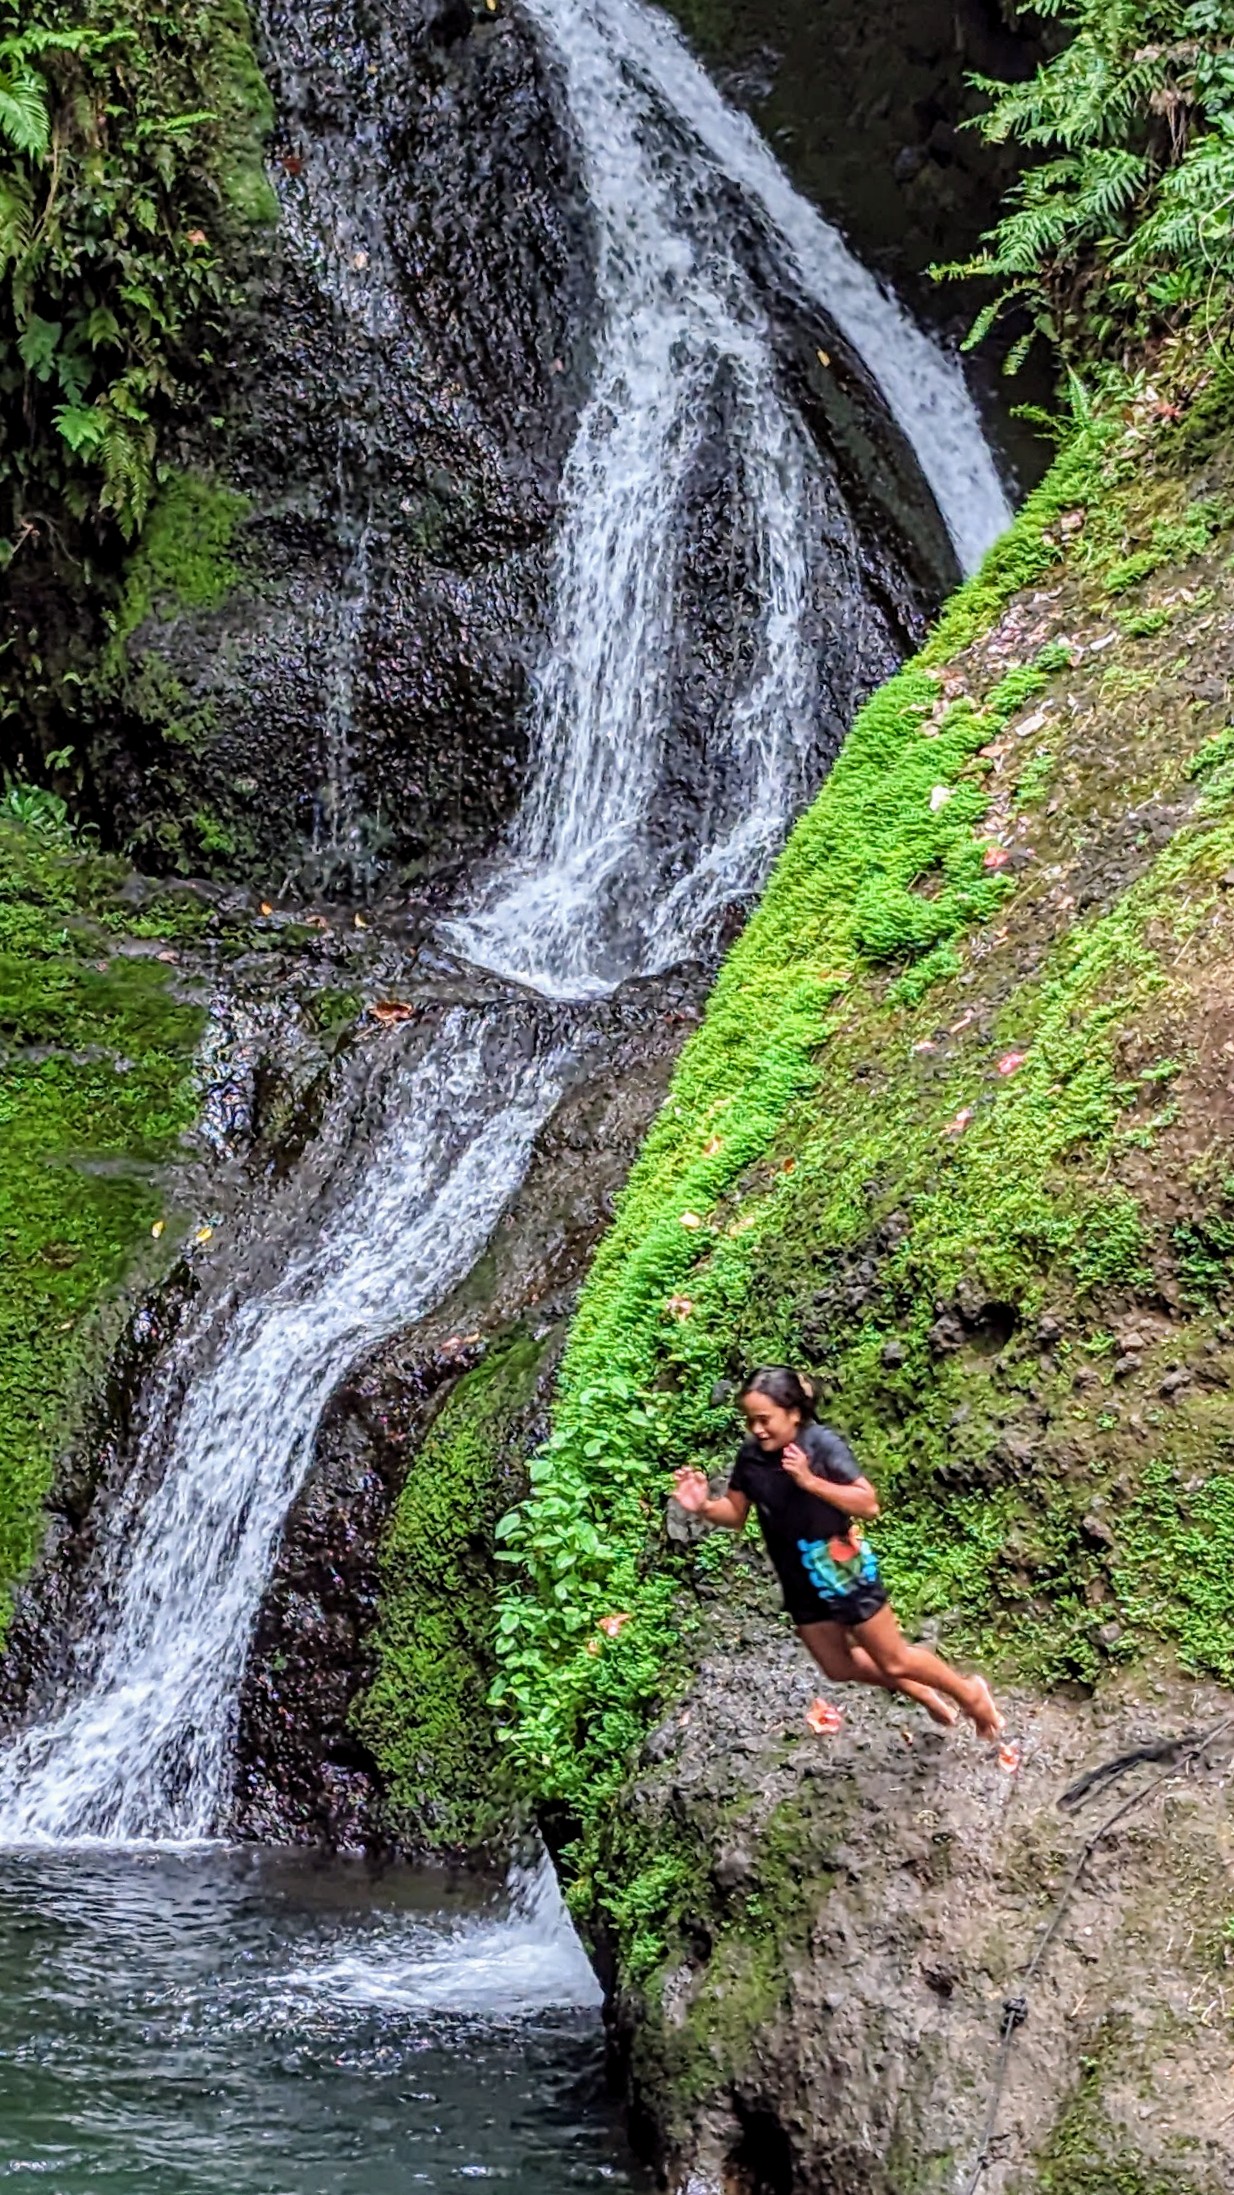 A girl joyfully leaps into a waterfall's pool off a moss covered rock